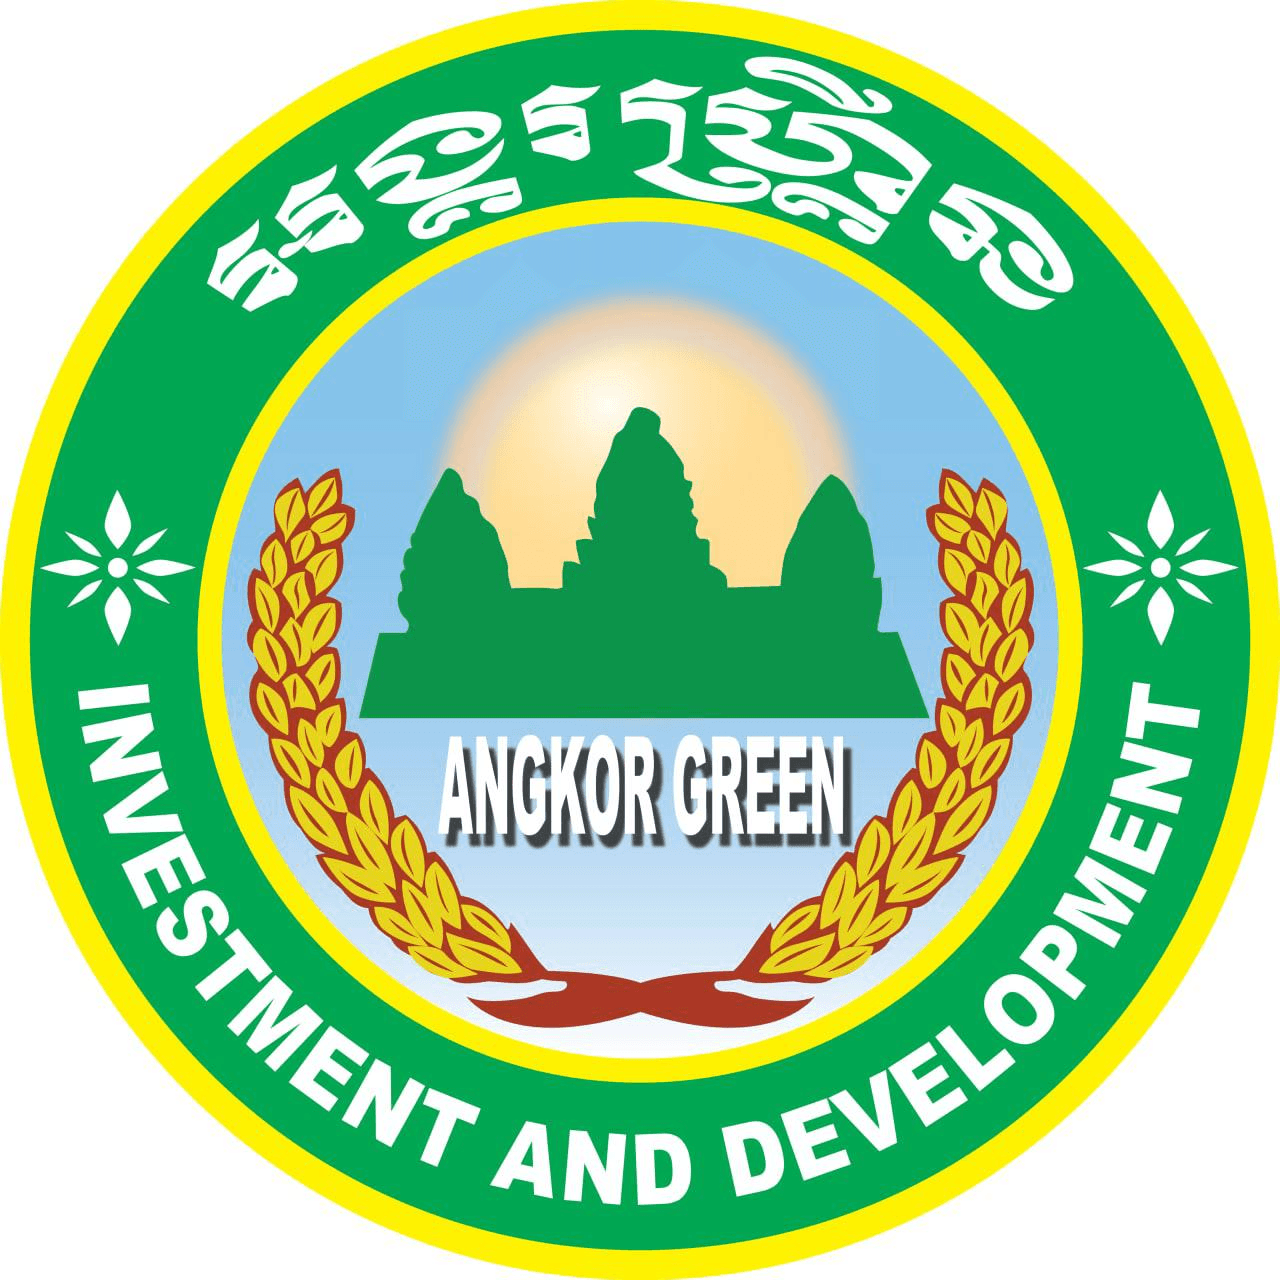 Angkor Green Investment and Development (AGID)Co., Ltd.